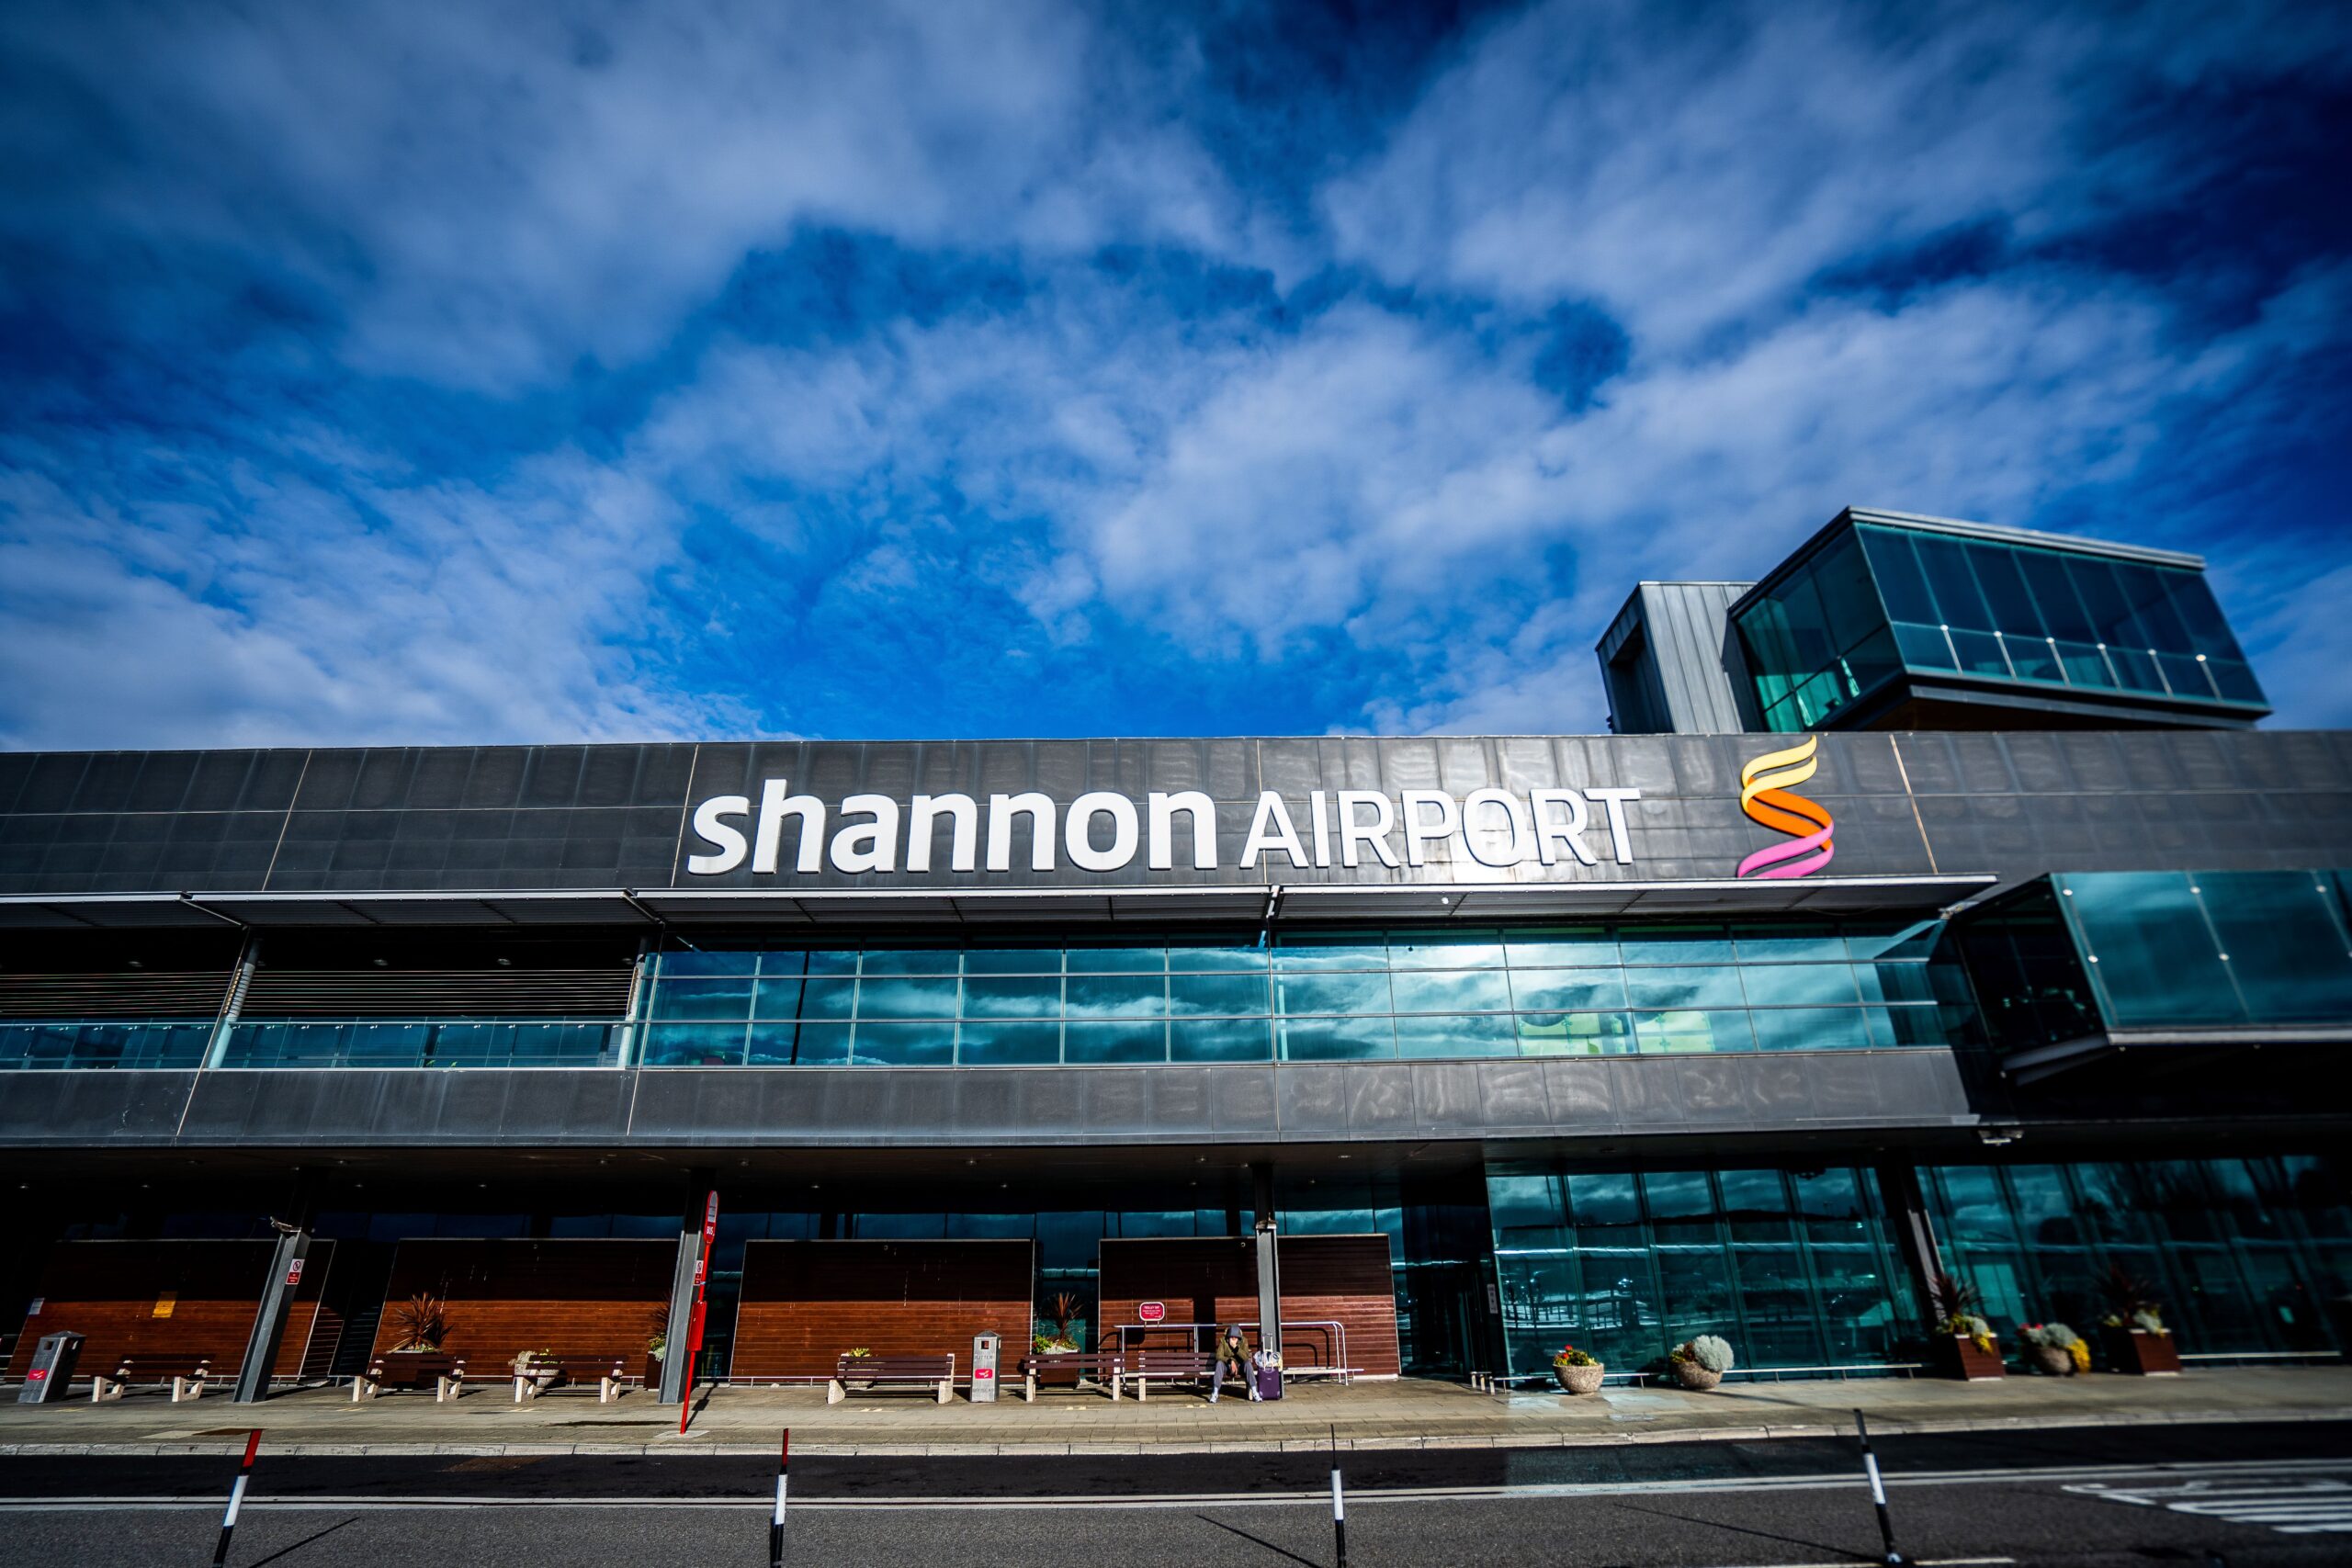 Shannon Airport August Bank Holiday passenger figures continue to surpass pre-covid numbers as the airport forecasts its busiest in five years